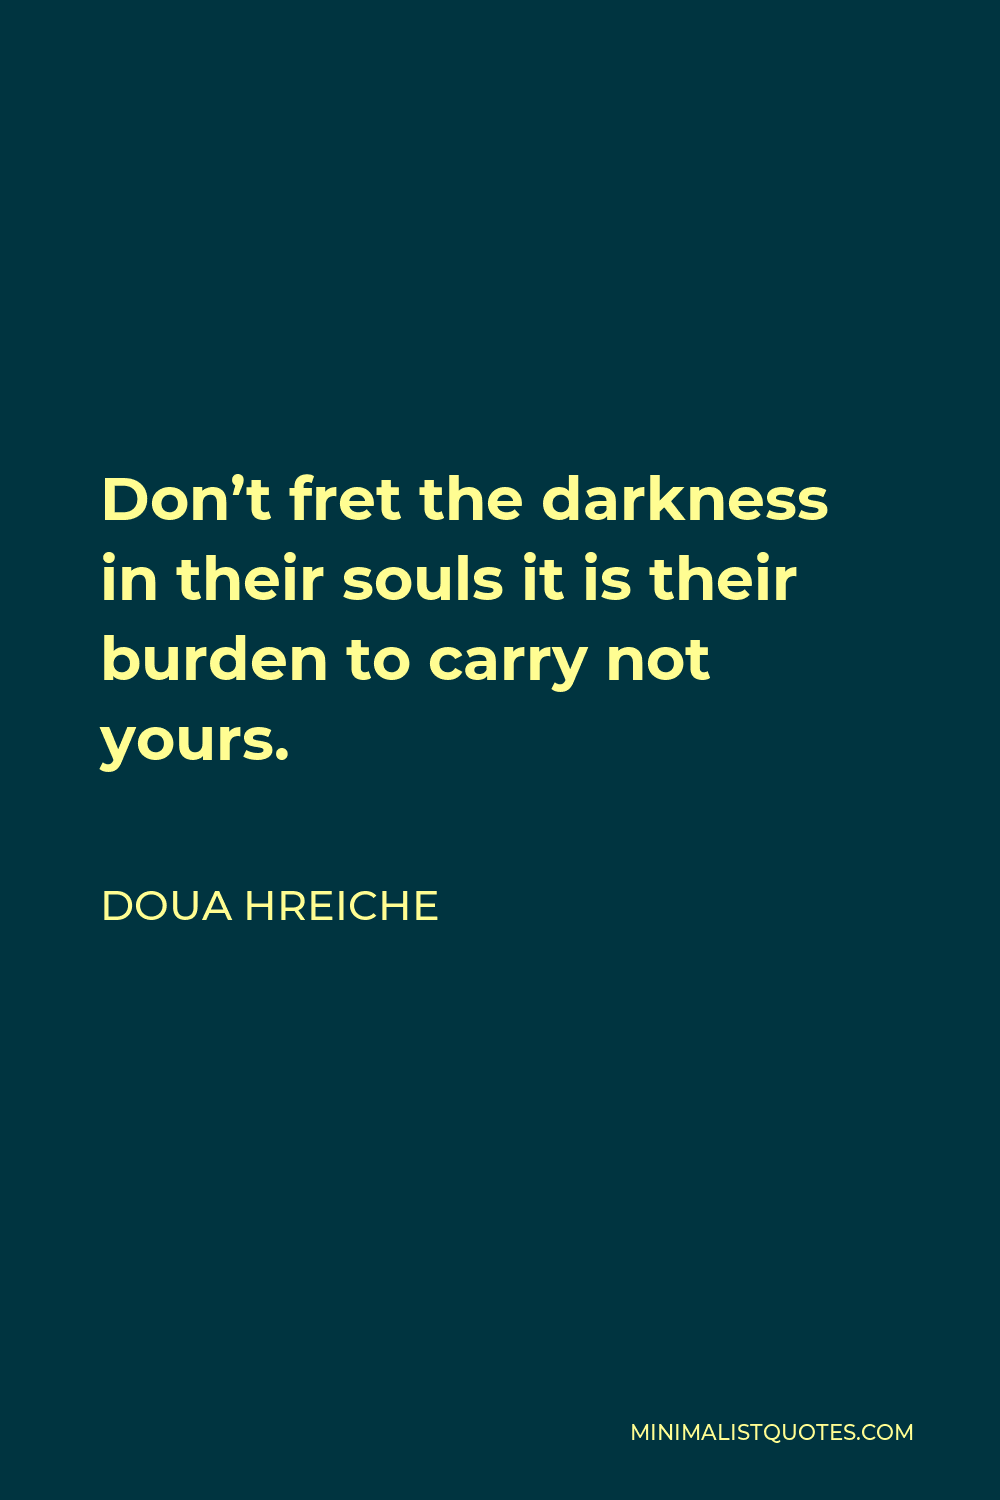 Doua Hreiche Quote - Don’t fret the darkness in their souls it is their burden to carry not yours.